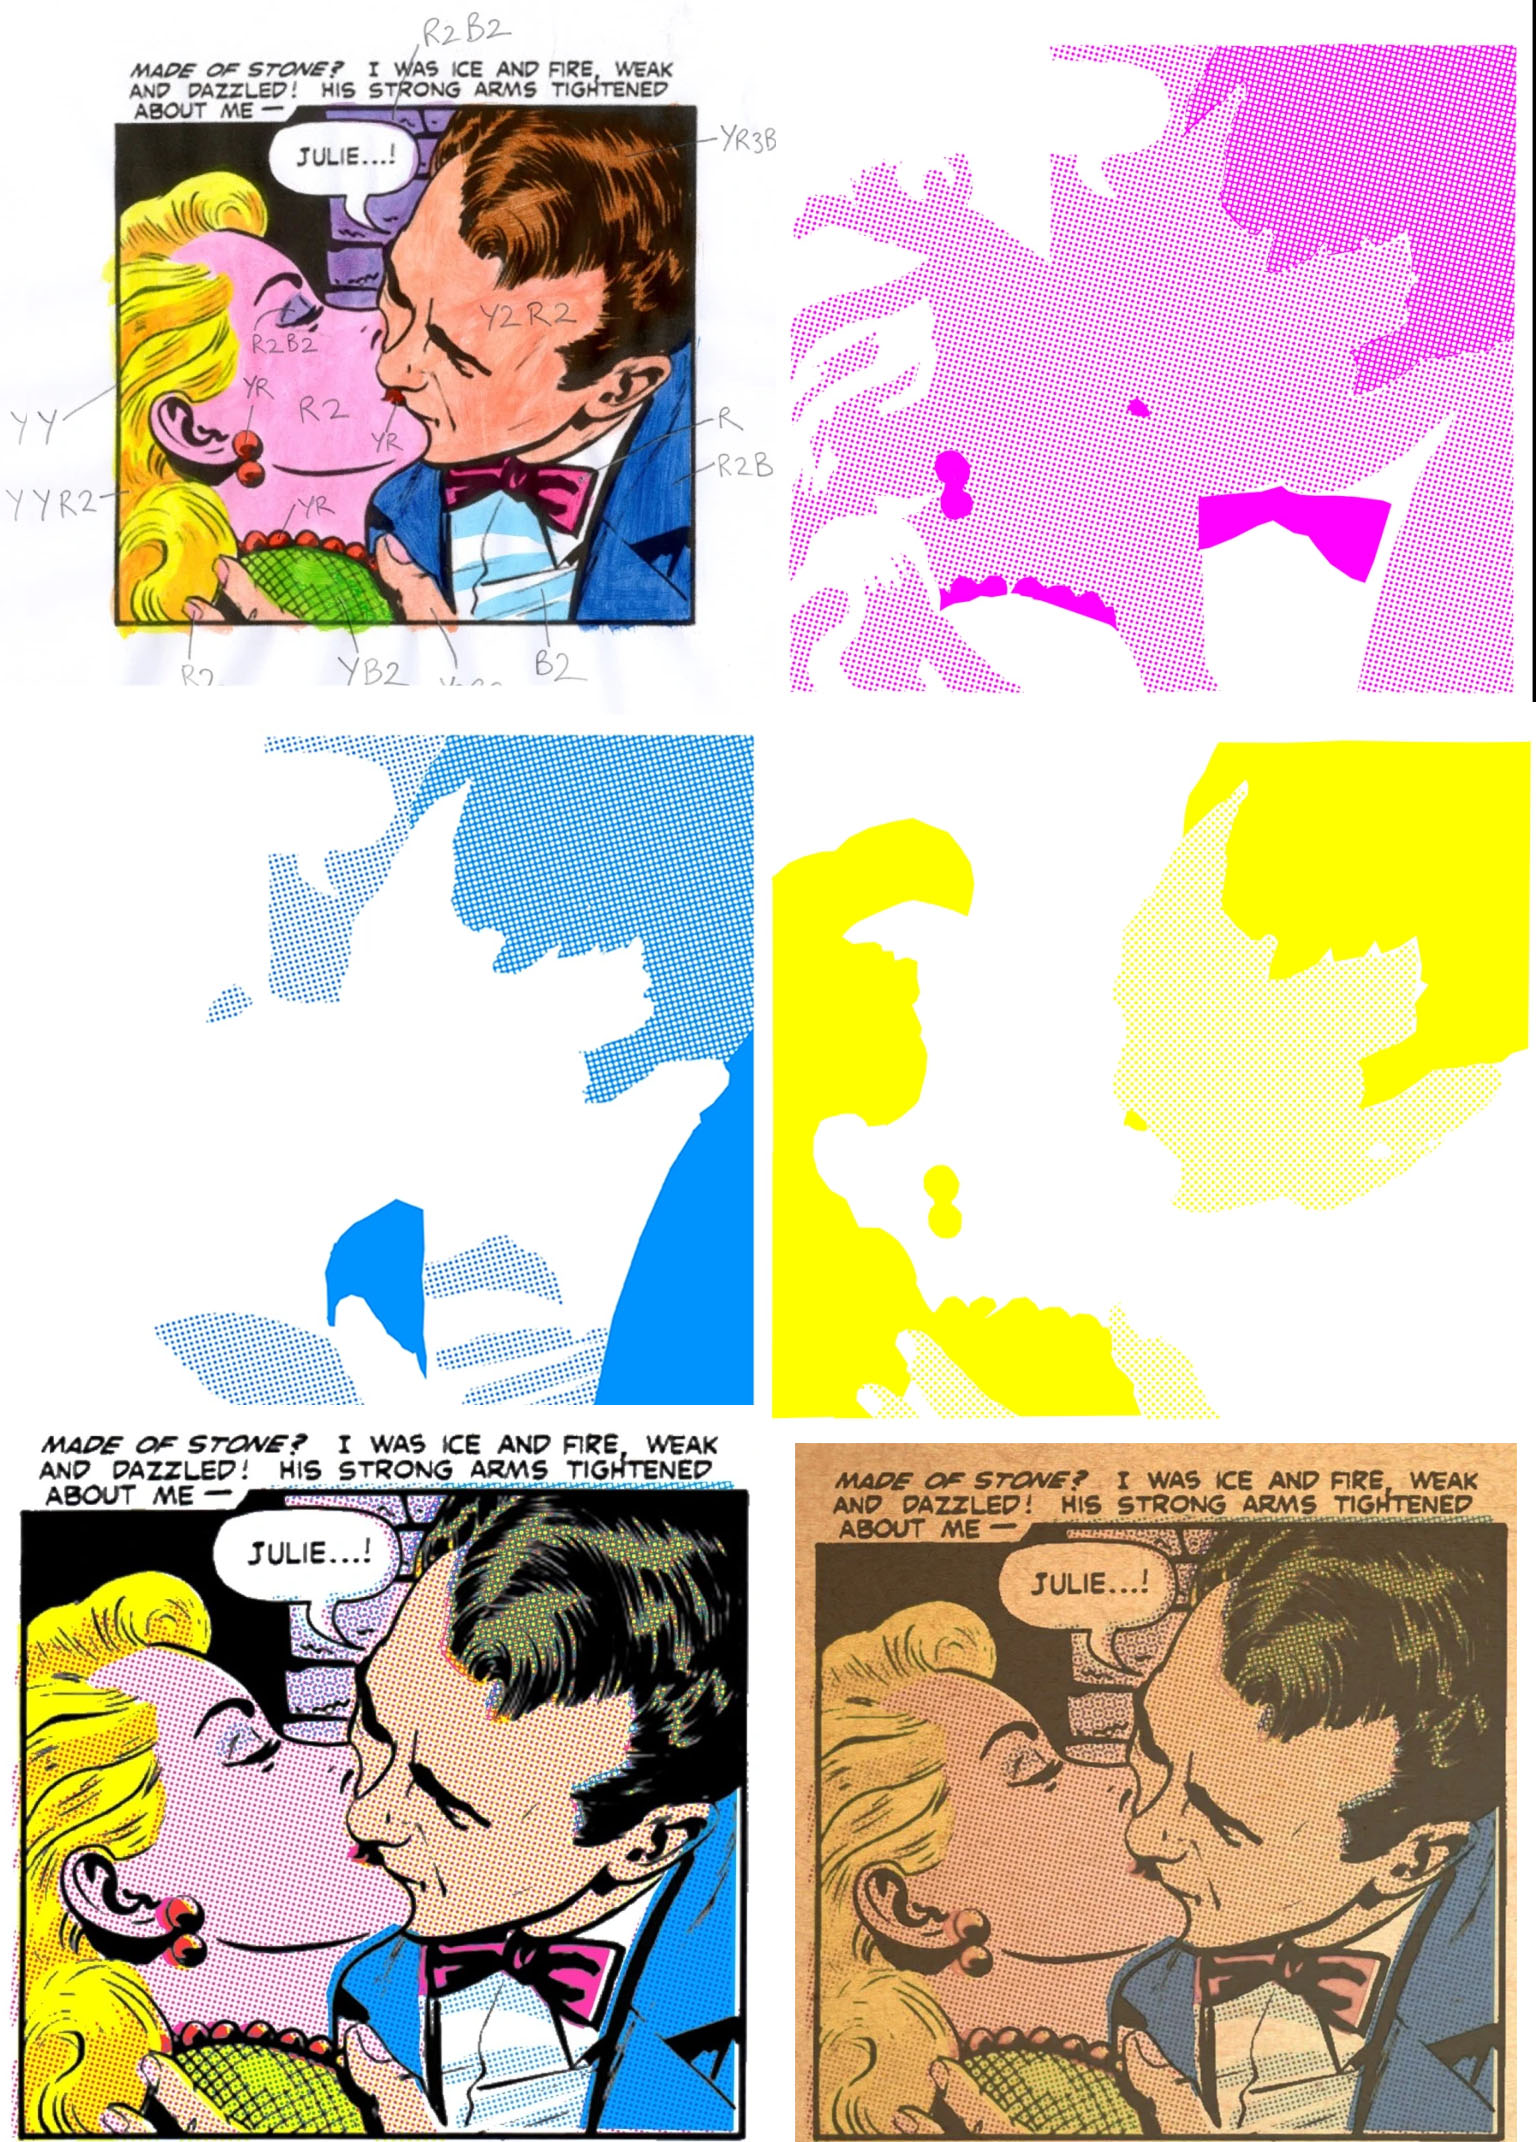 Simulating colour separating using the acetate method in the Silver Age of Comic by Guy Lawley.jpg